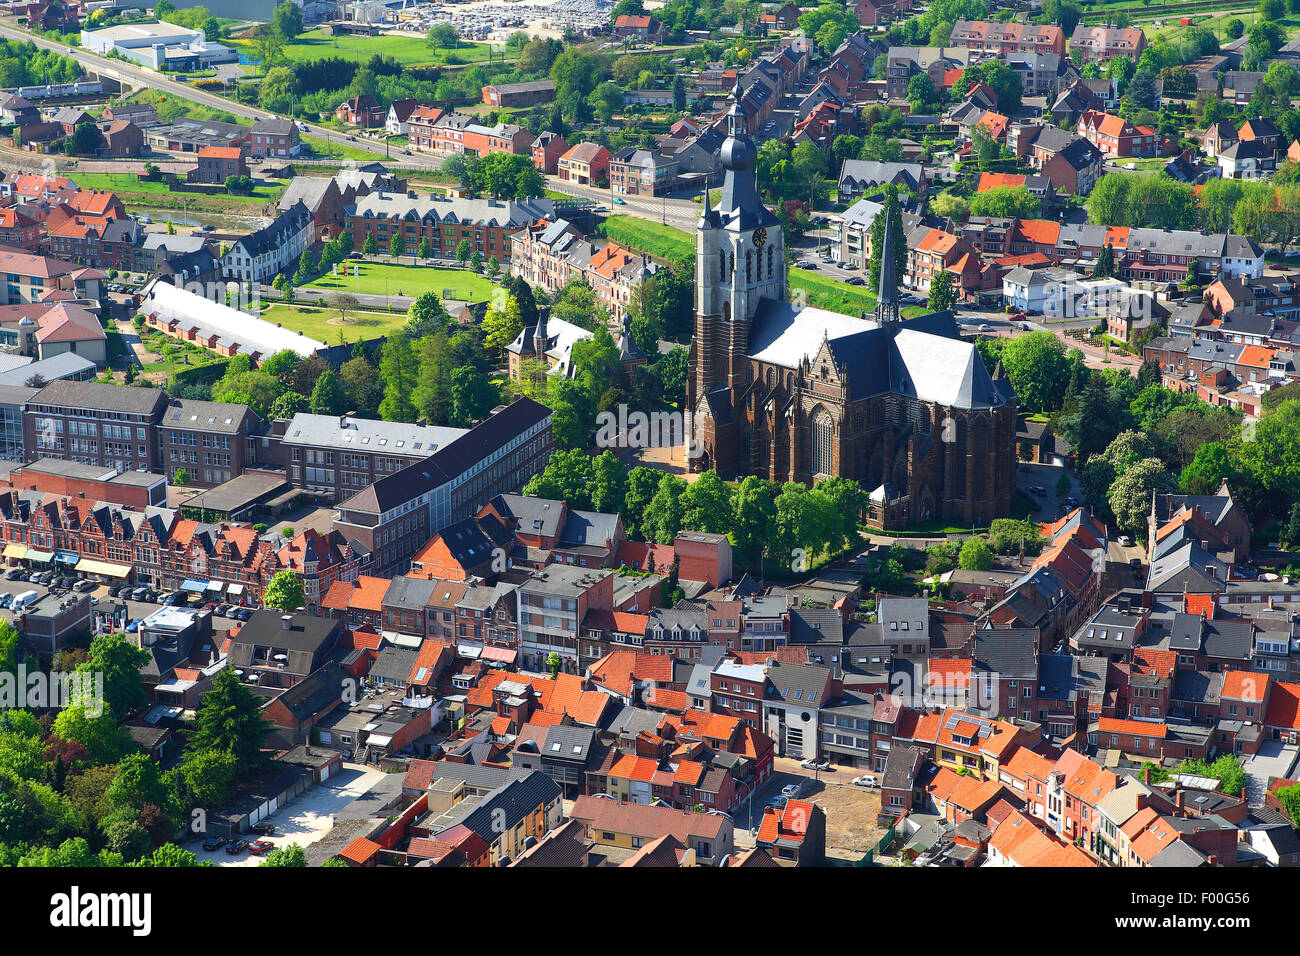 Village with church of municipality Werchter from the air, Belgium, Werchter Stock Photo